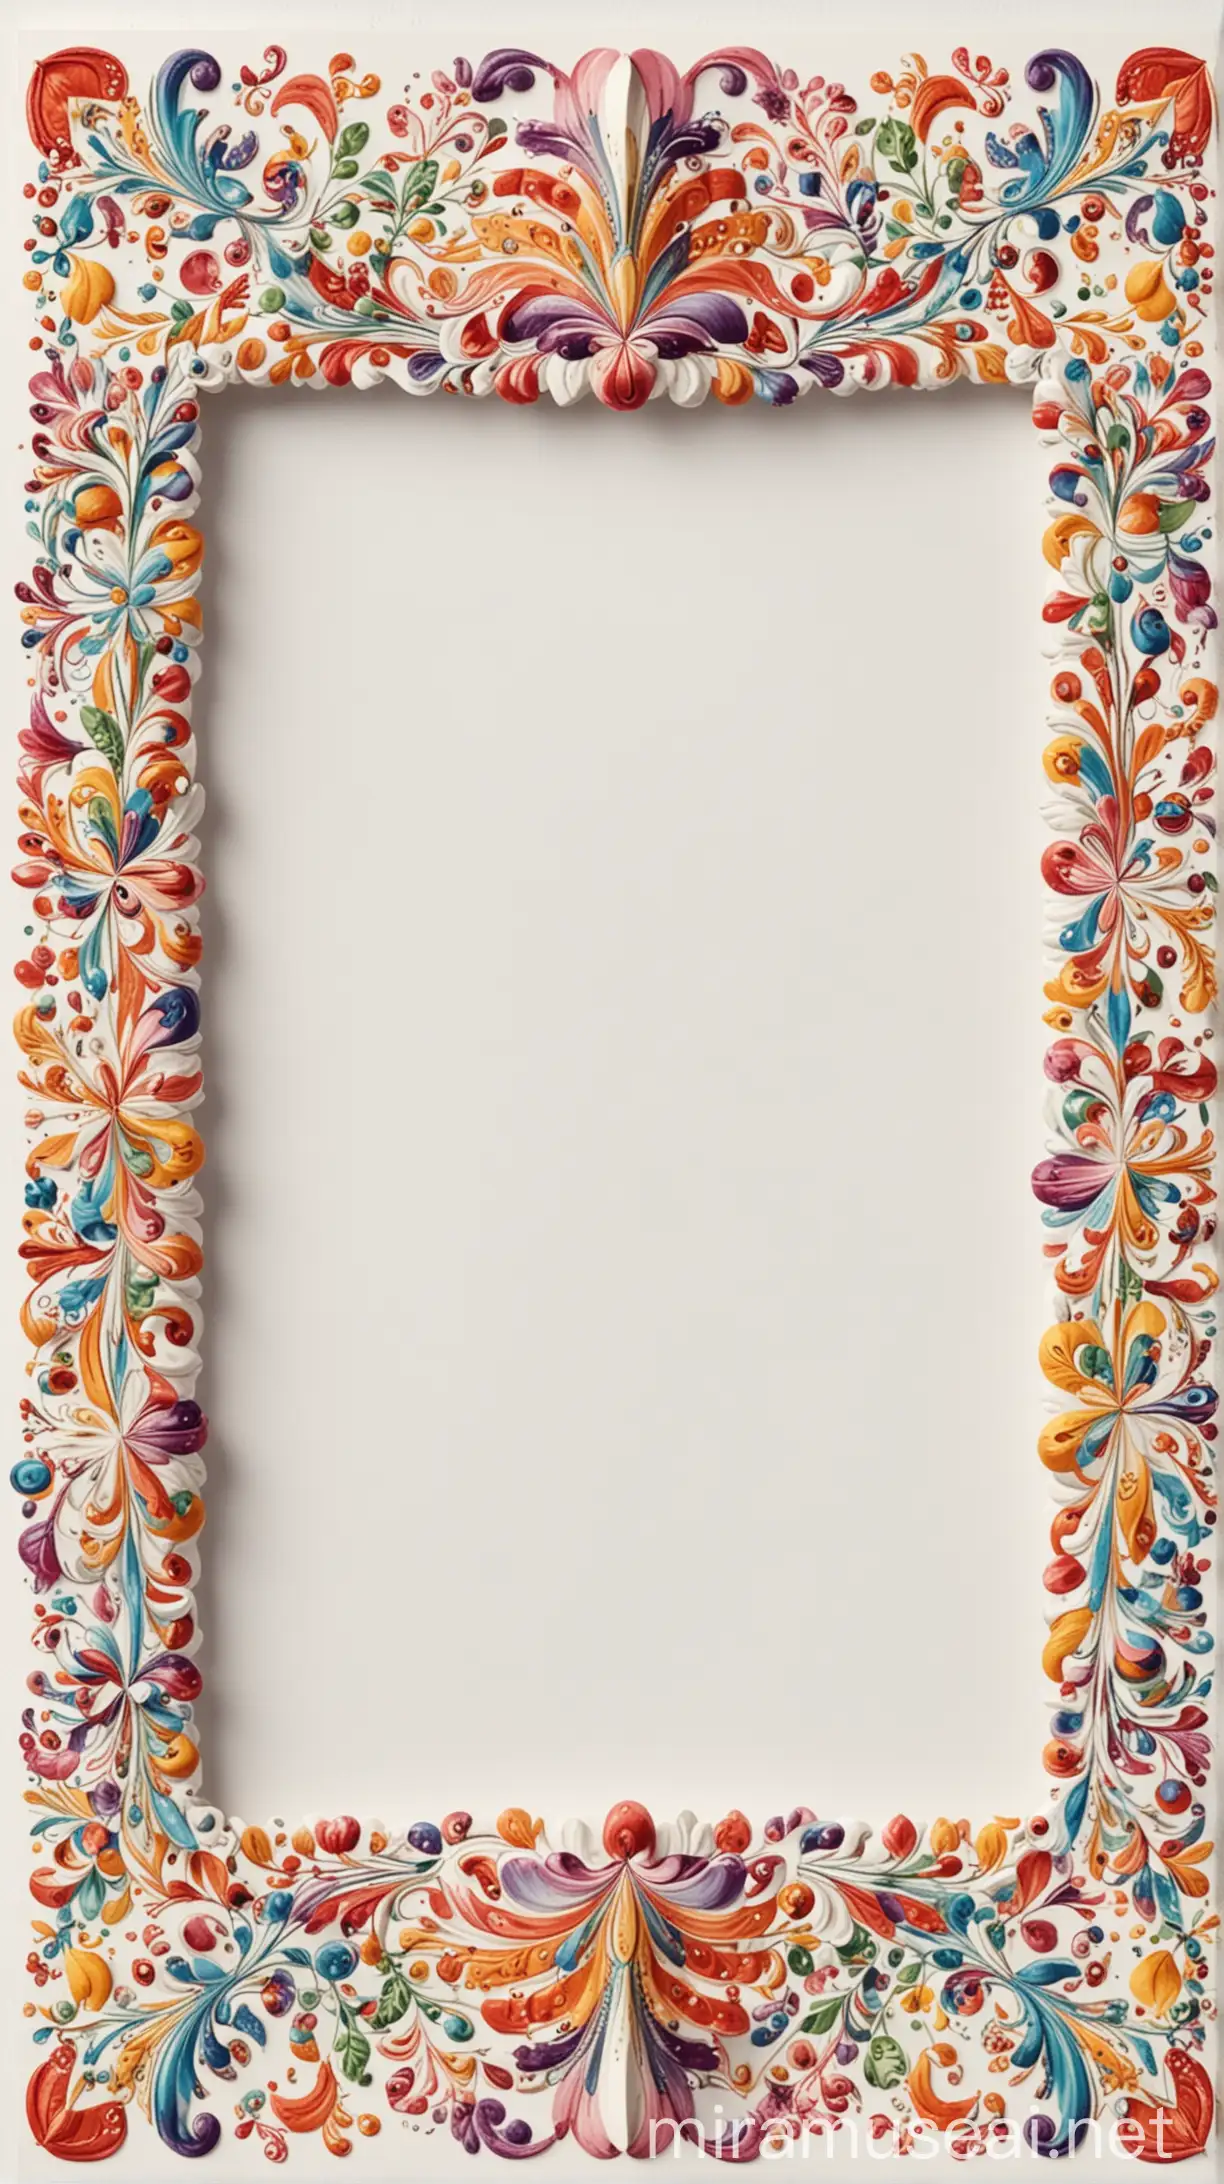 Generate an empty white image with a border made of carnival inspired shapes and colours no nature, no flowers